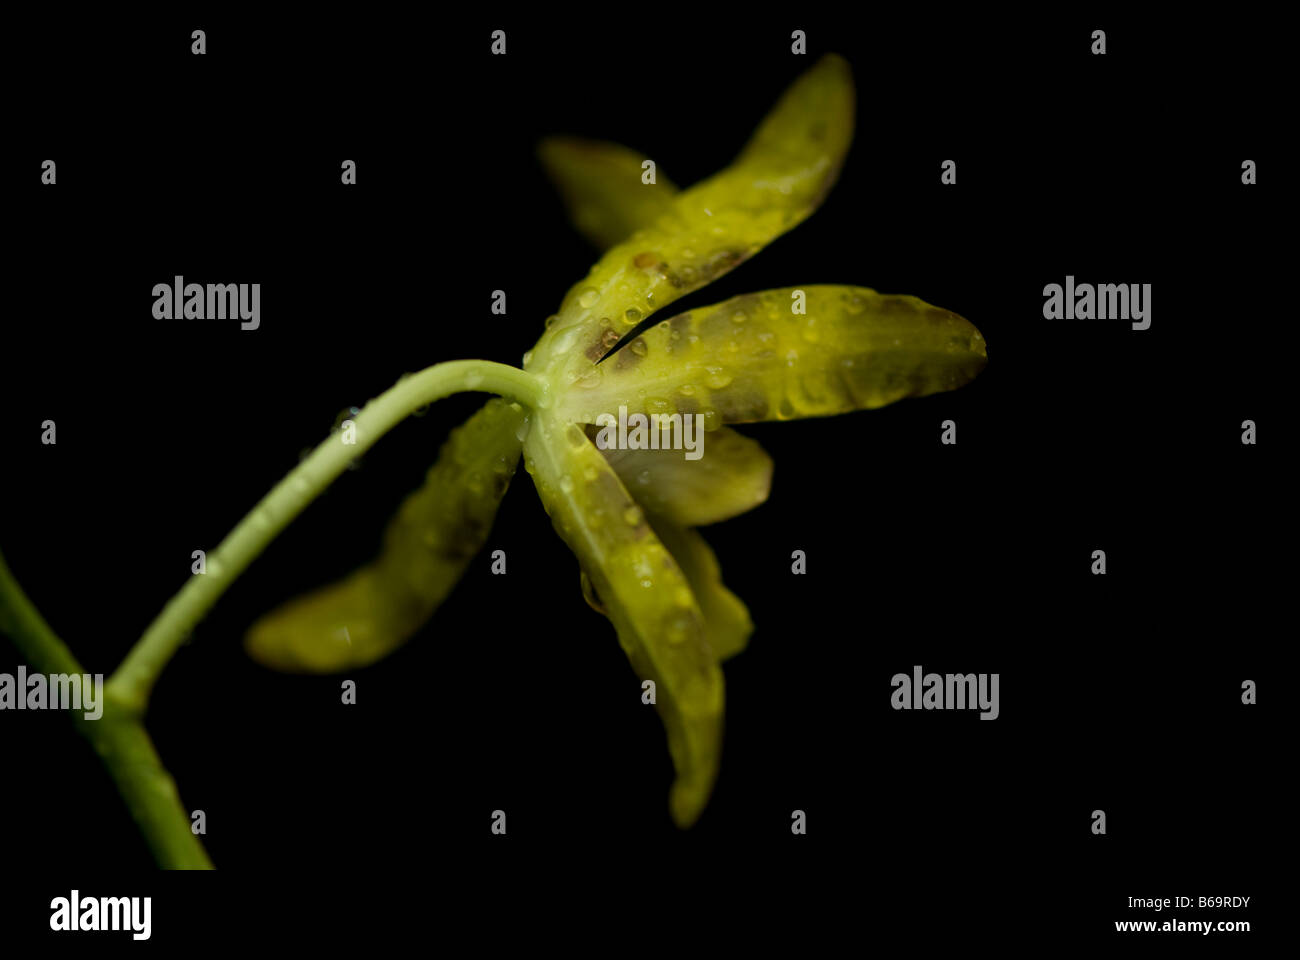 Odontoglossum variety of Orchid with water droplets against dark background. Stock Photo